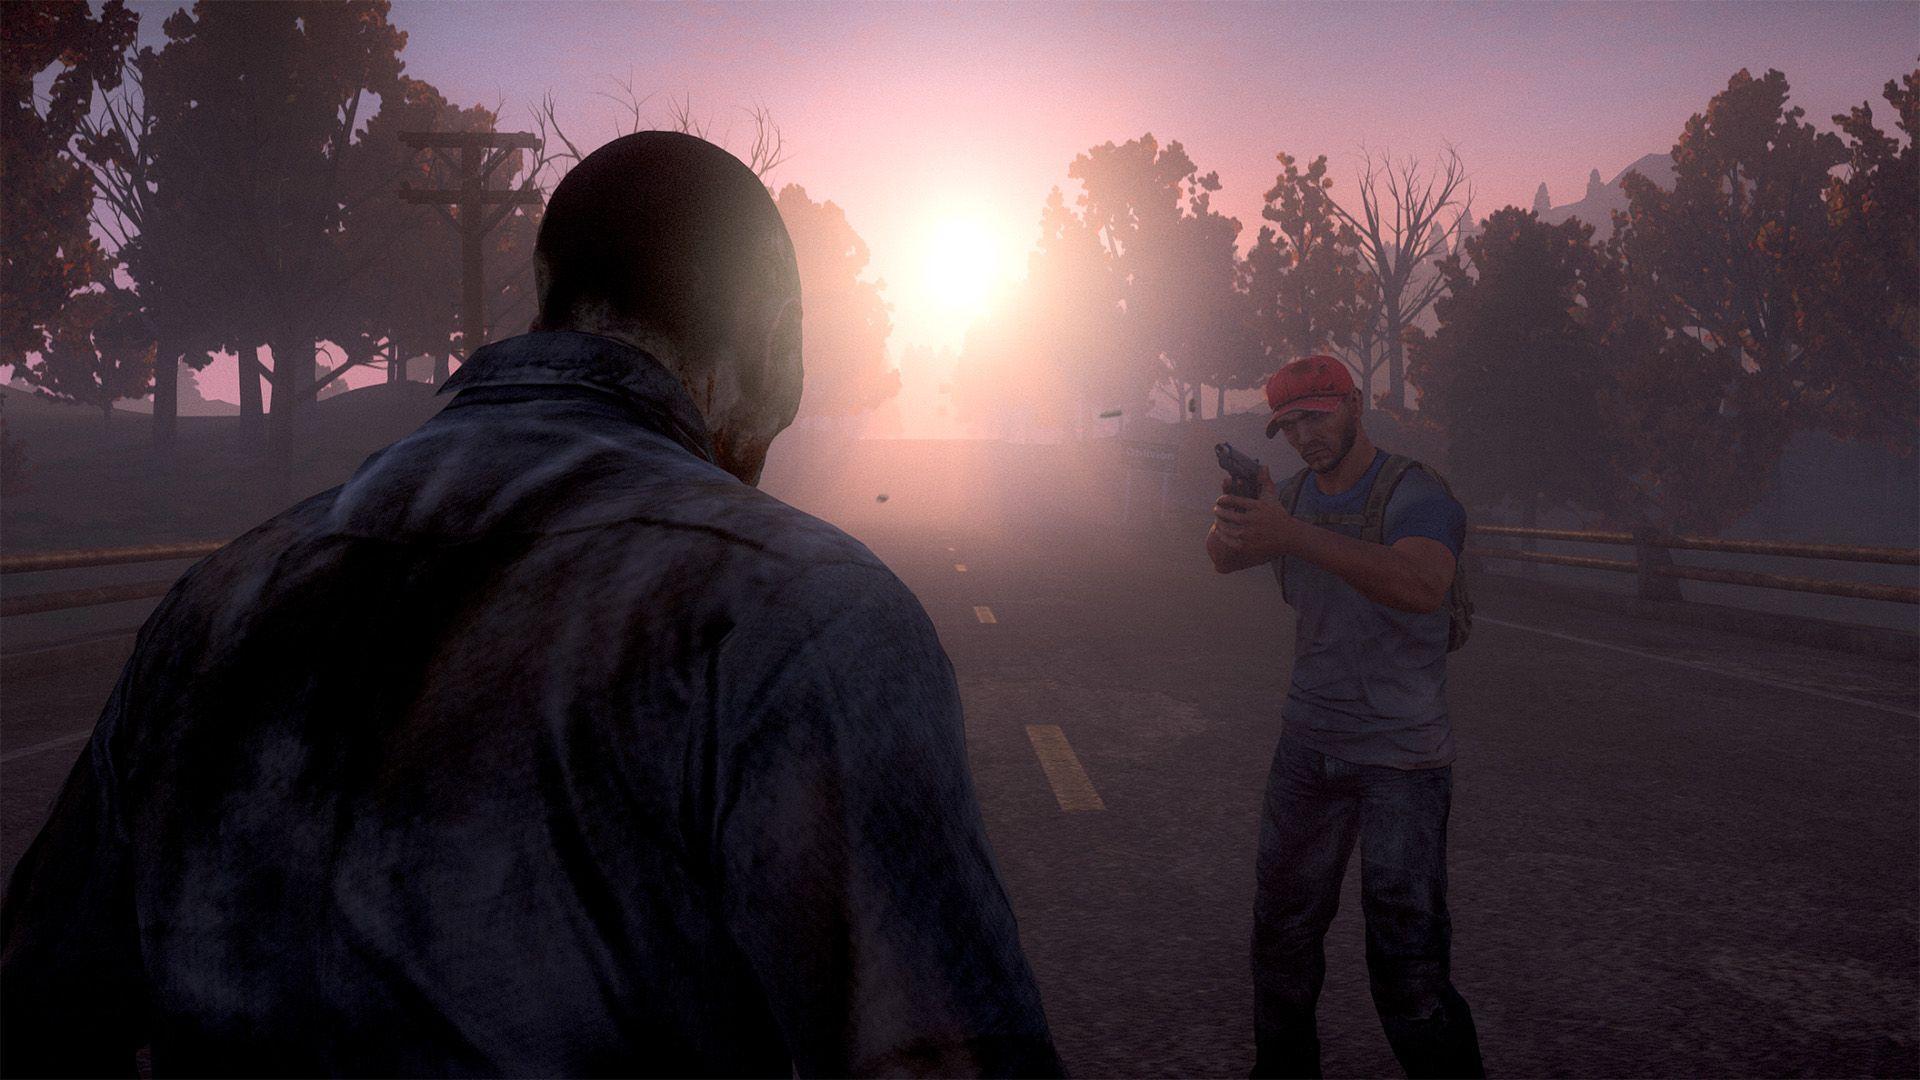 H1Z1: Just Survive Review. The Nerd Stash